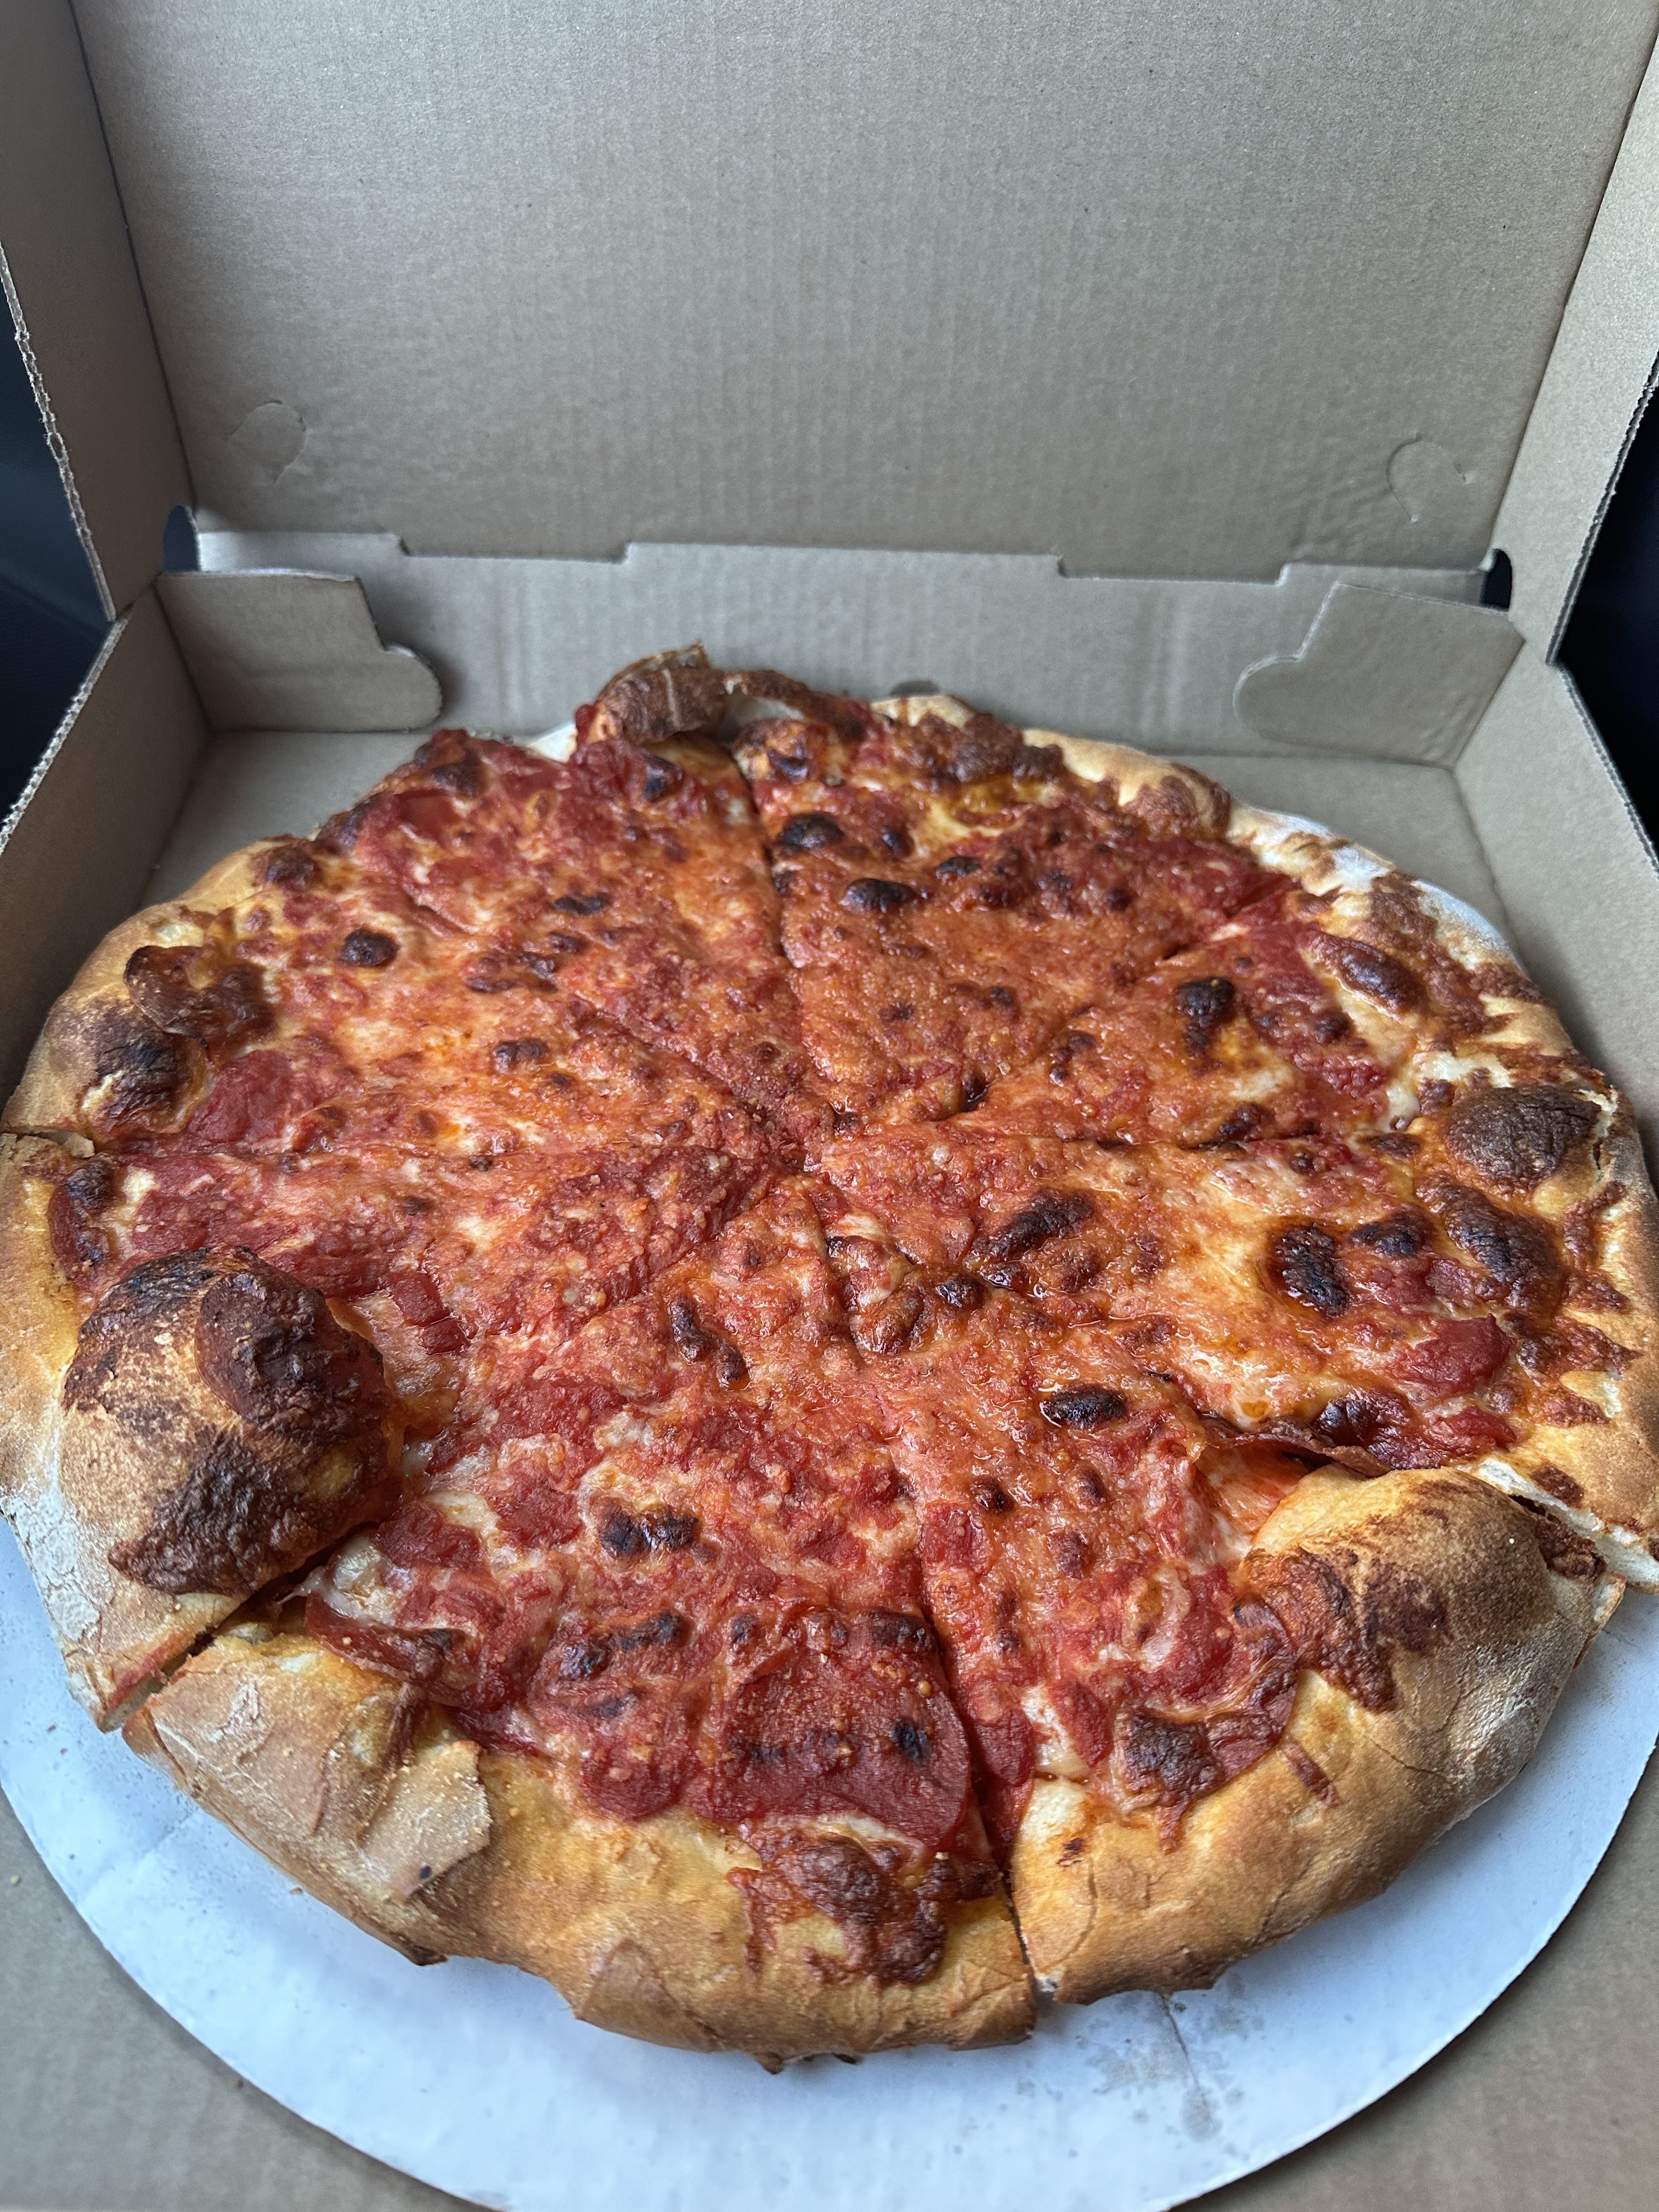 A burnt pie of pepperoni pizza that appears to have one or two pepperonis on the pie from Santarpio's in East Boston. The pepperonis turned out to be hiding under the cheese.